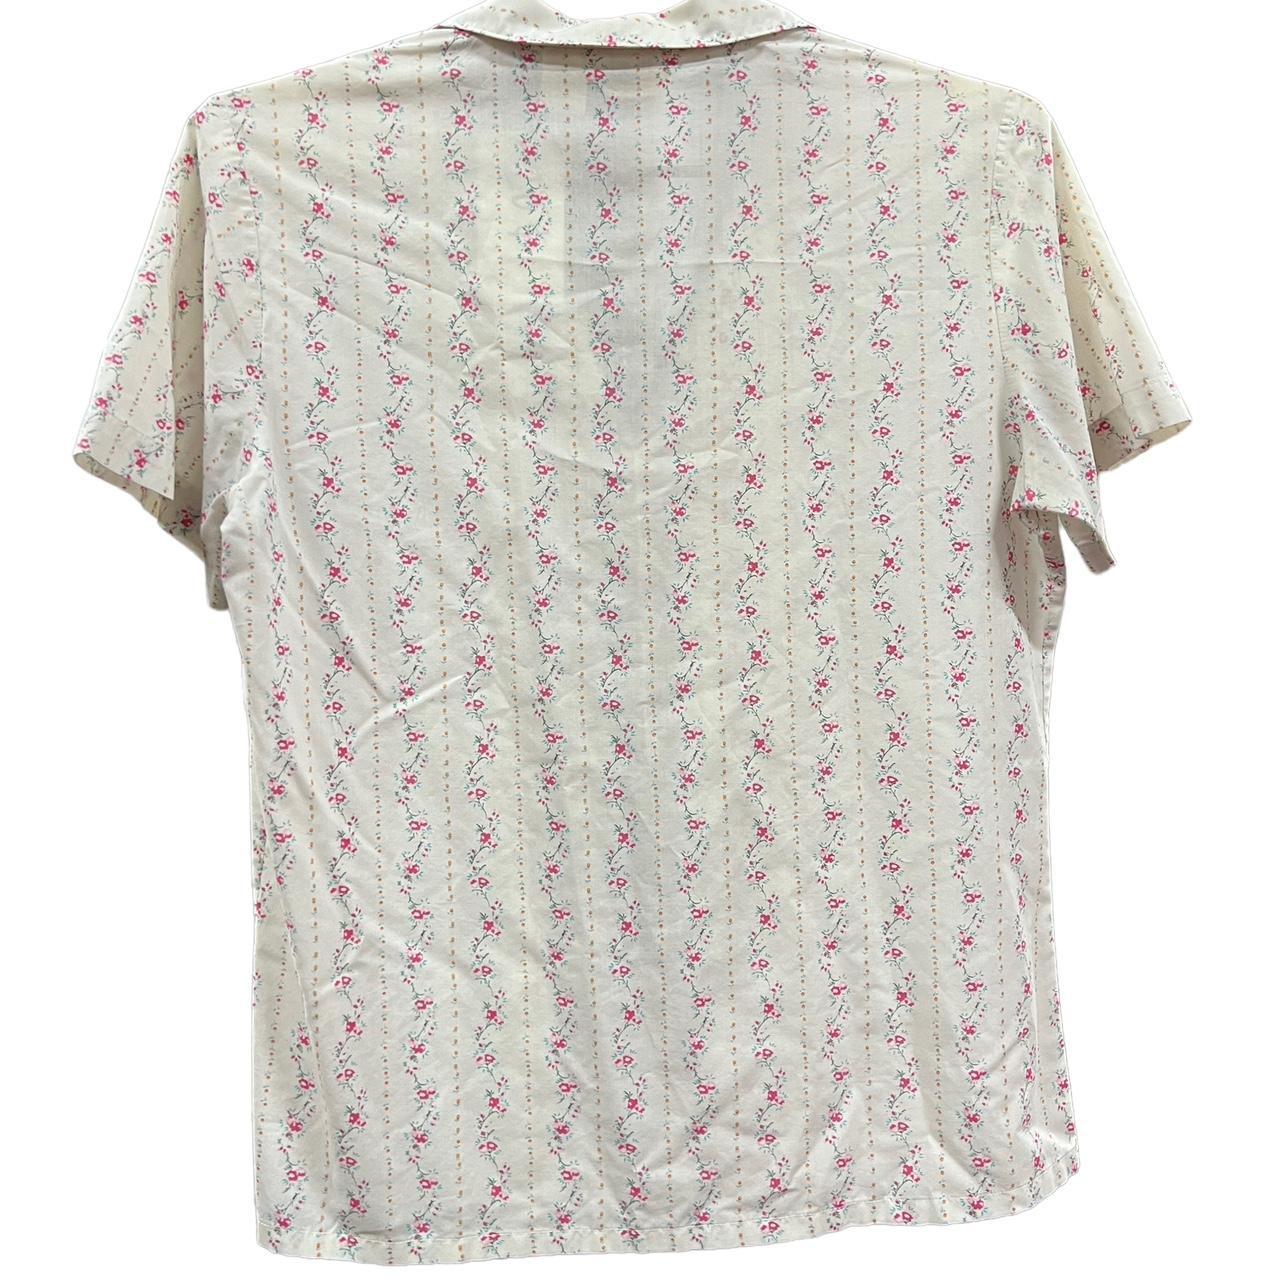 Sears Women's White and Pink Blouse (2)